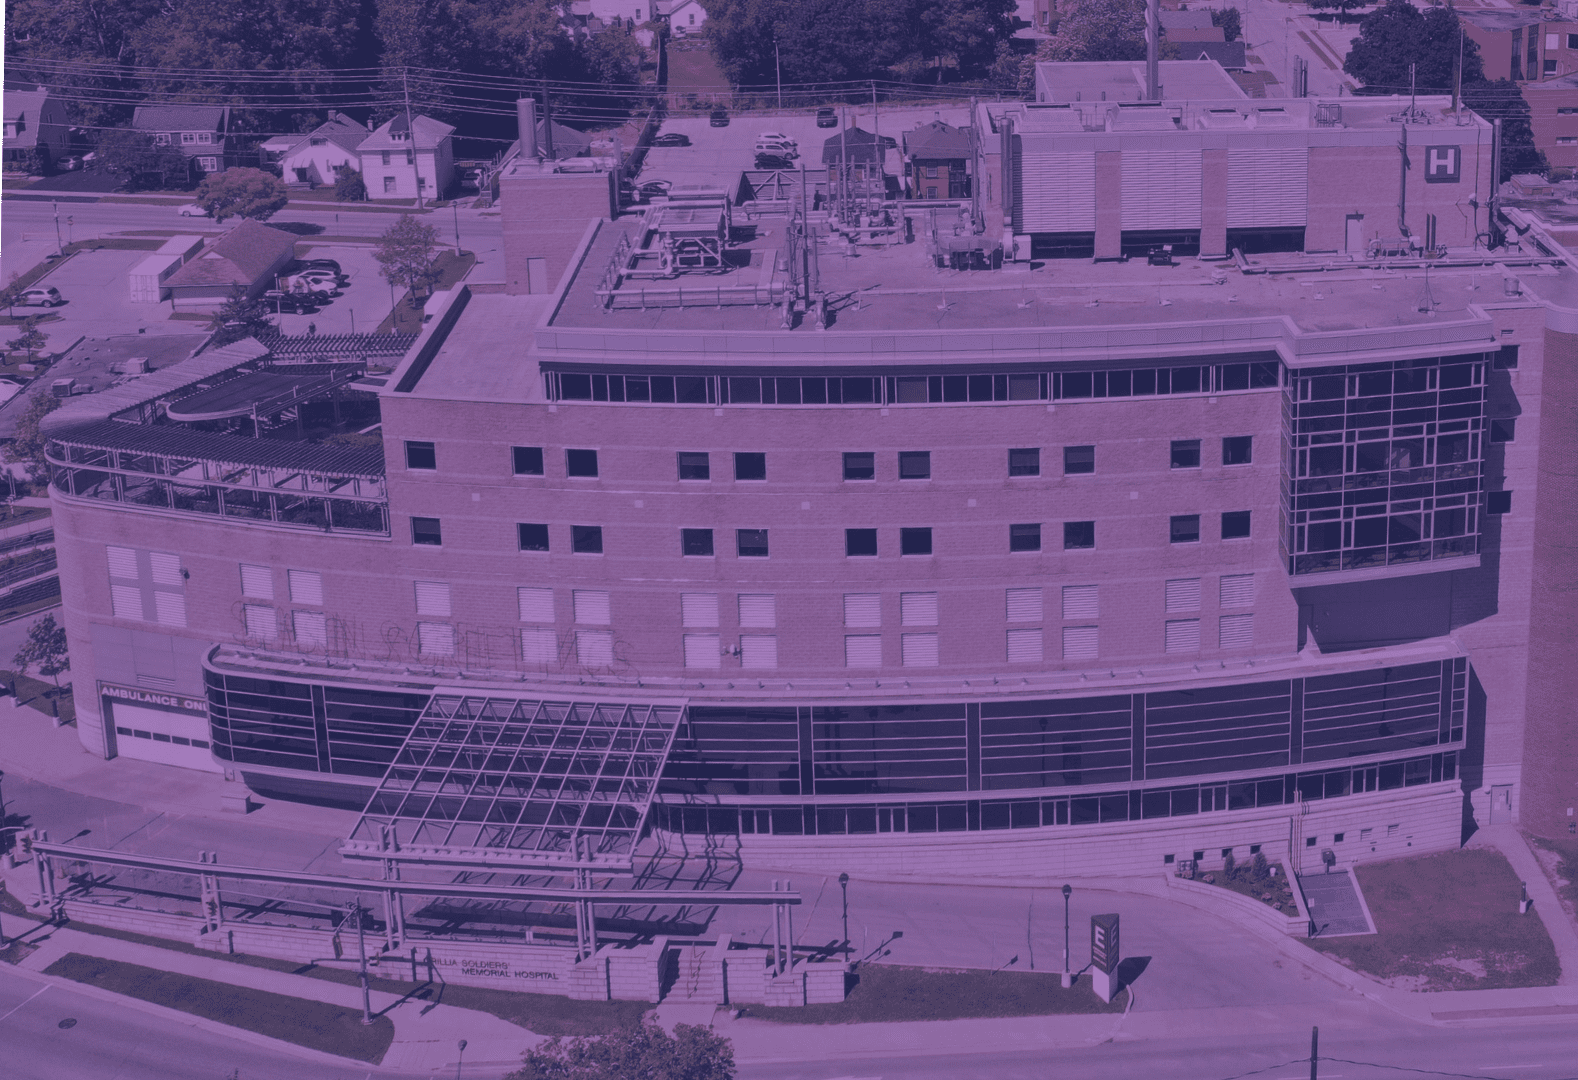 Cancer Care - Soldiers' Memorial Hospital